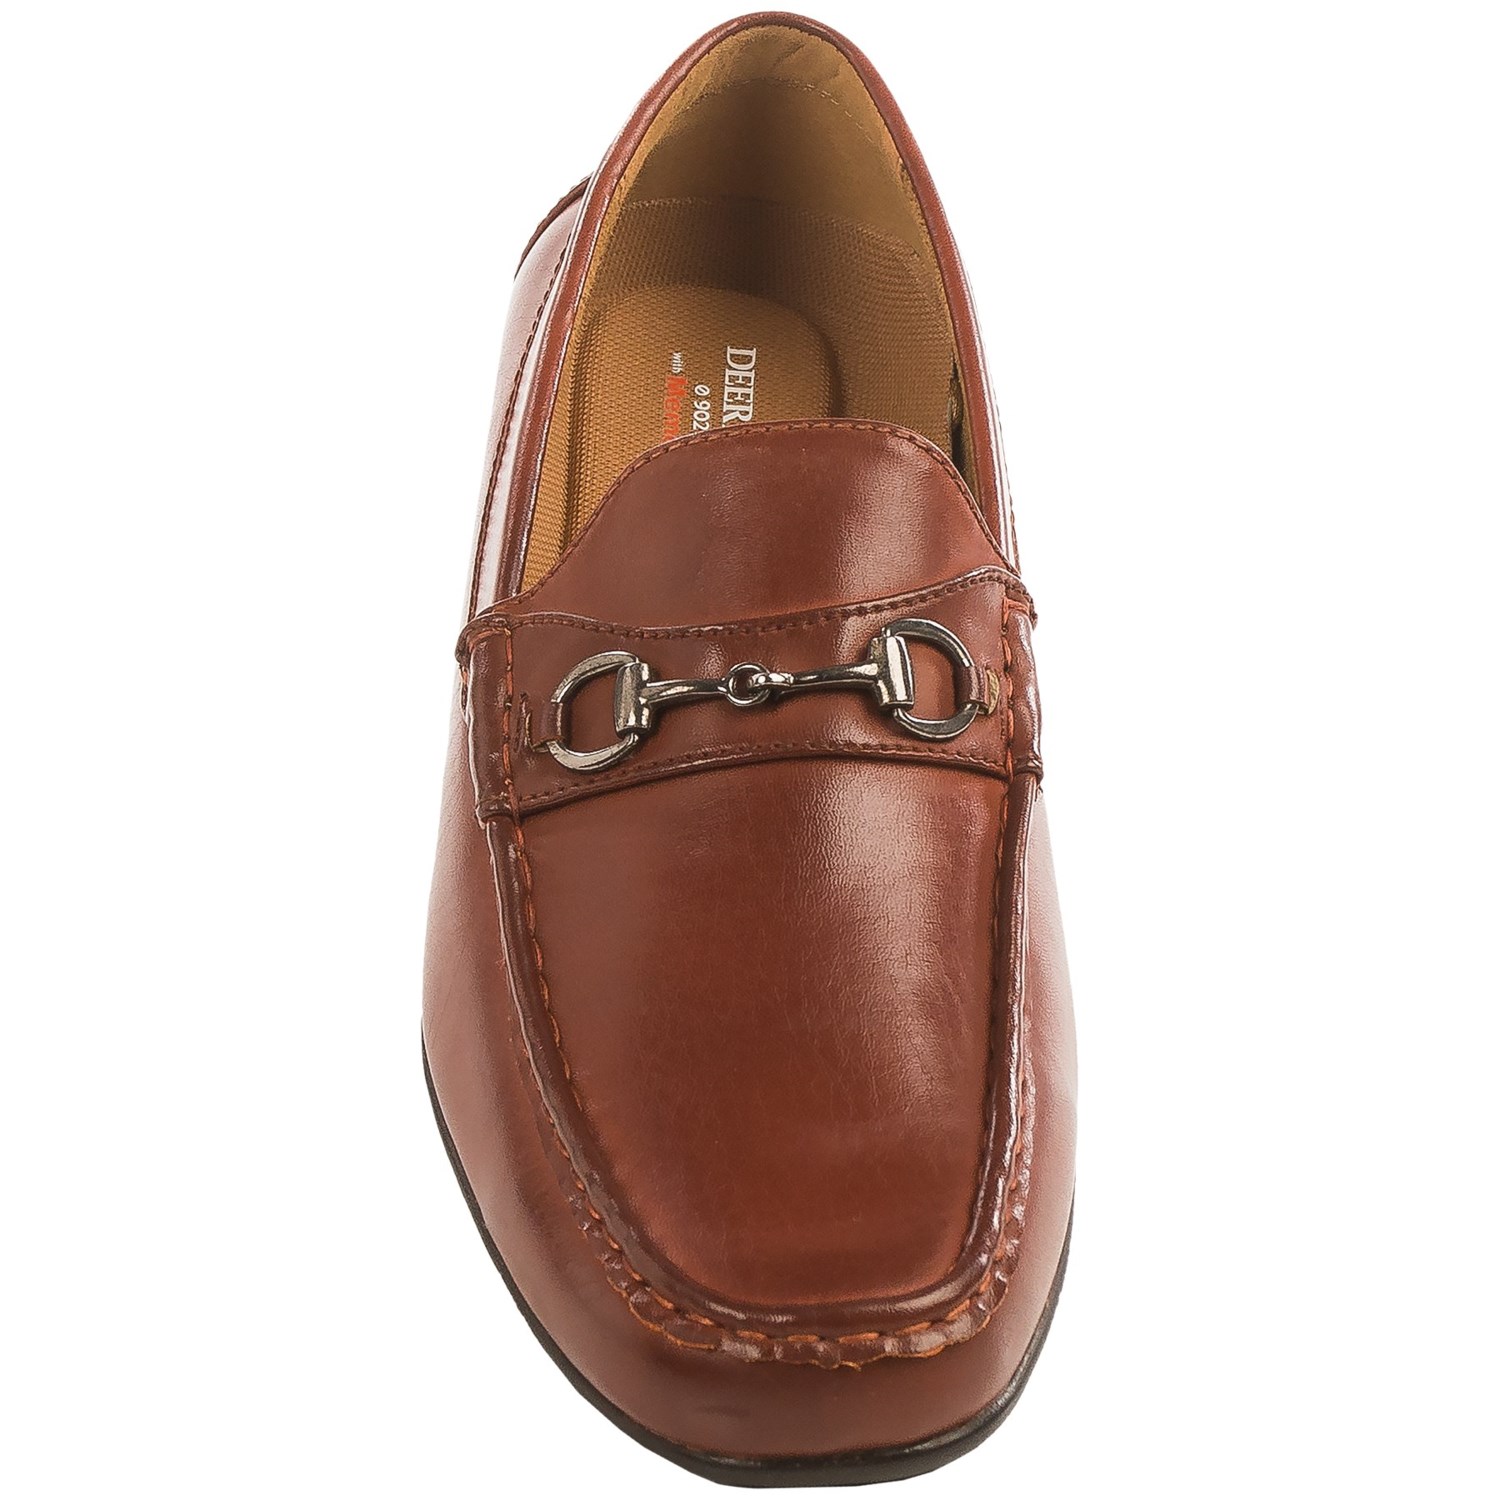 Deer Stags Manual Bit Loafers (For Men) - Save 41%